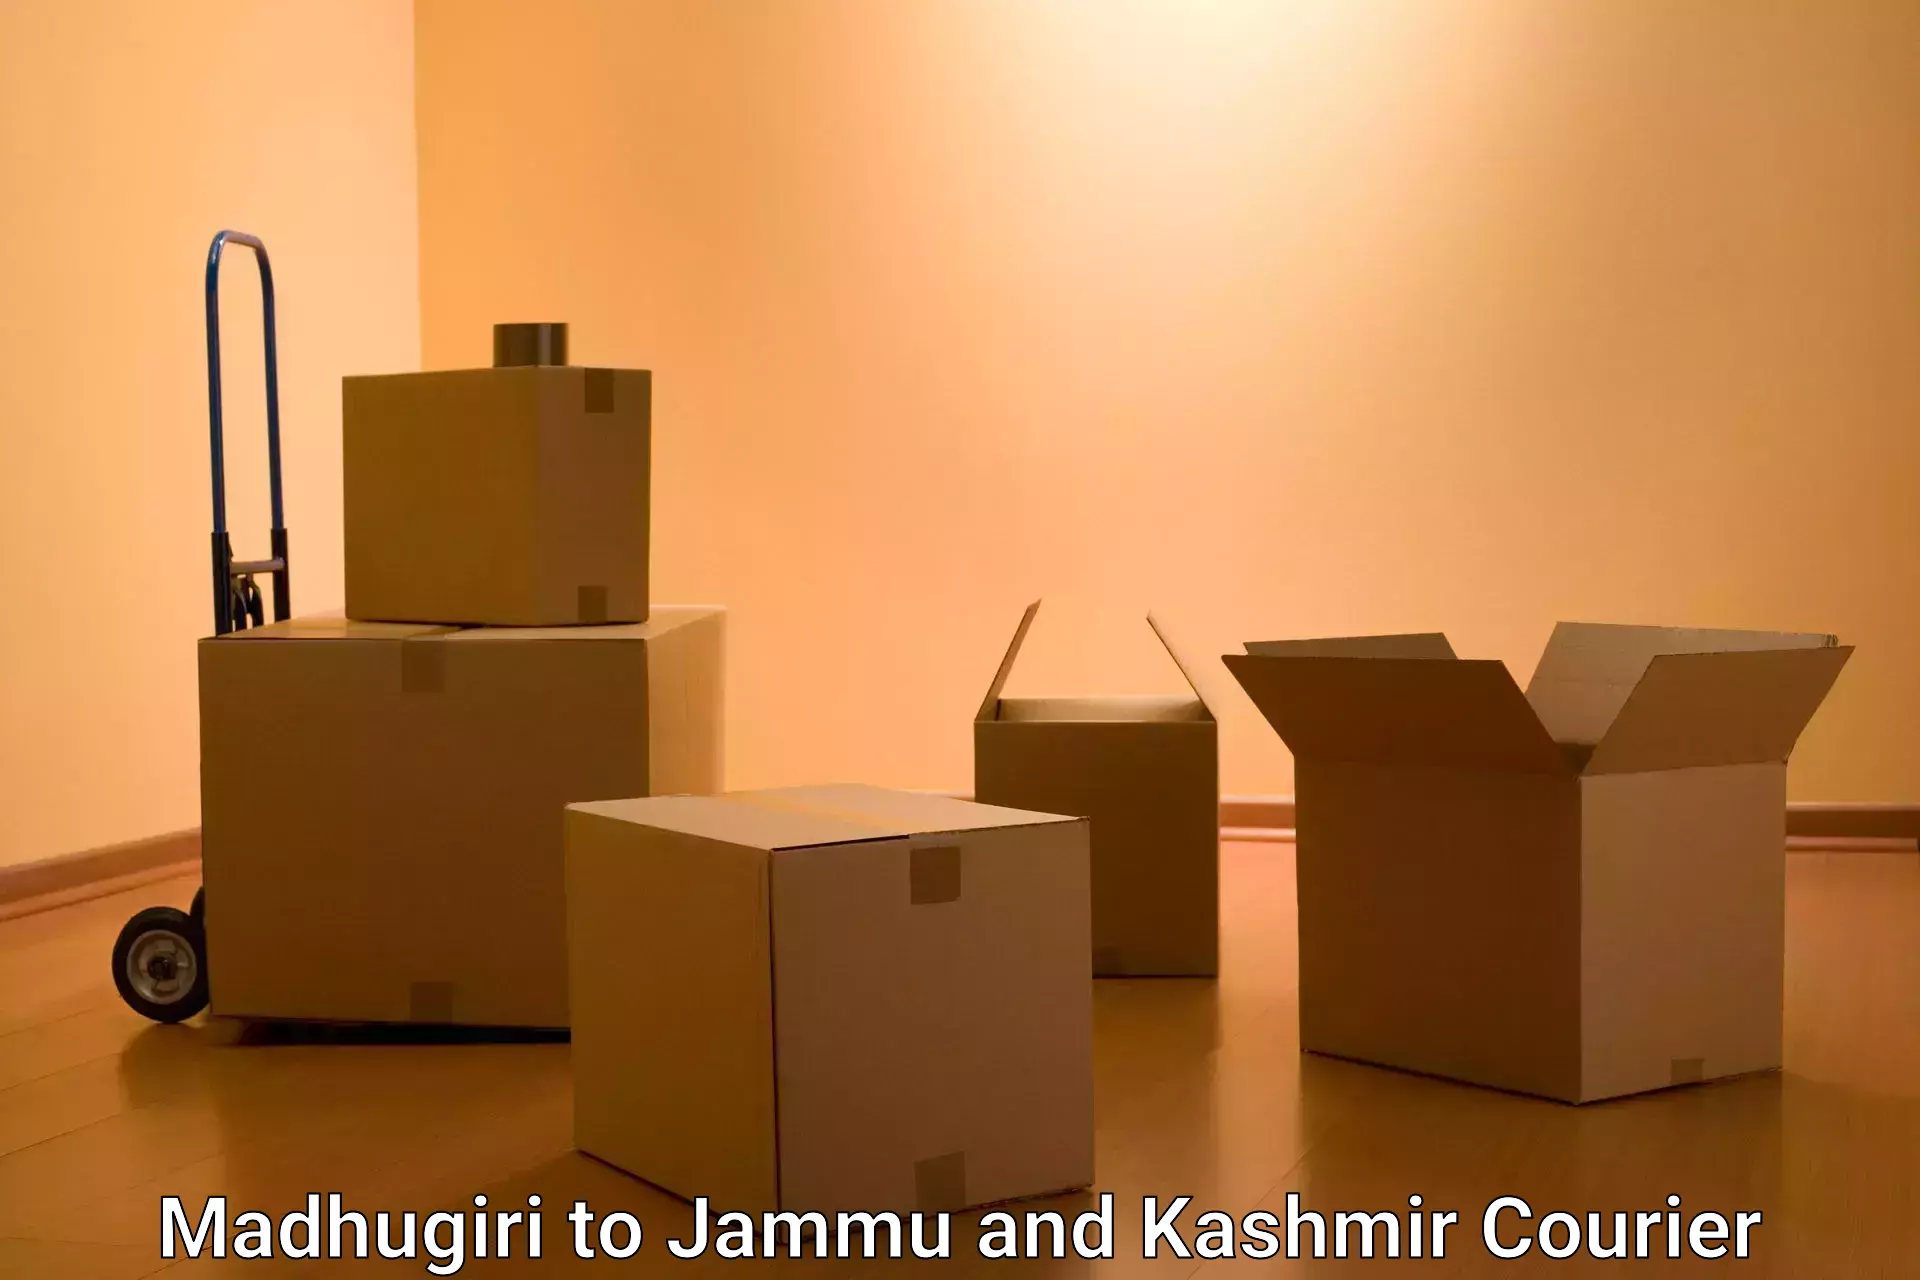 Cash on delivery service Madhugiri to Jammu and Kashmir